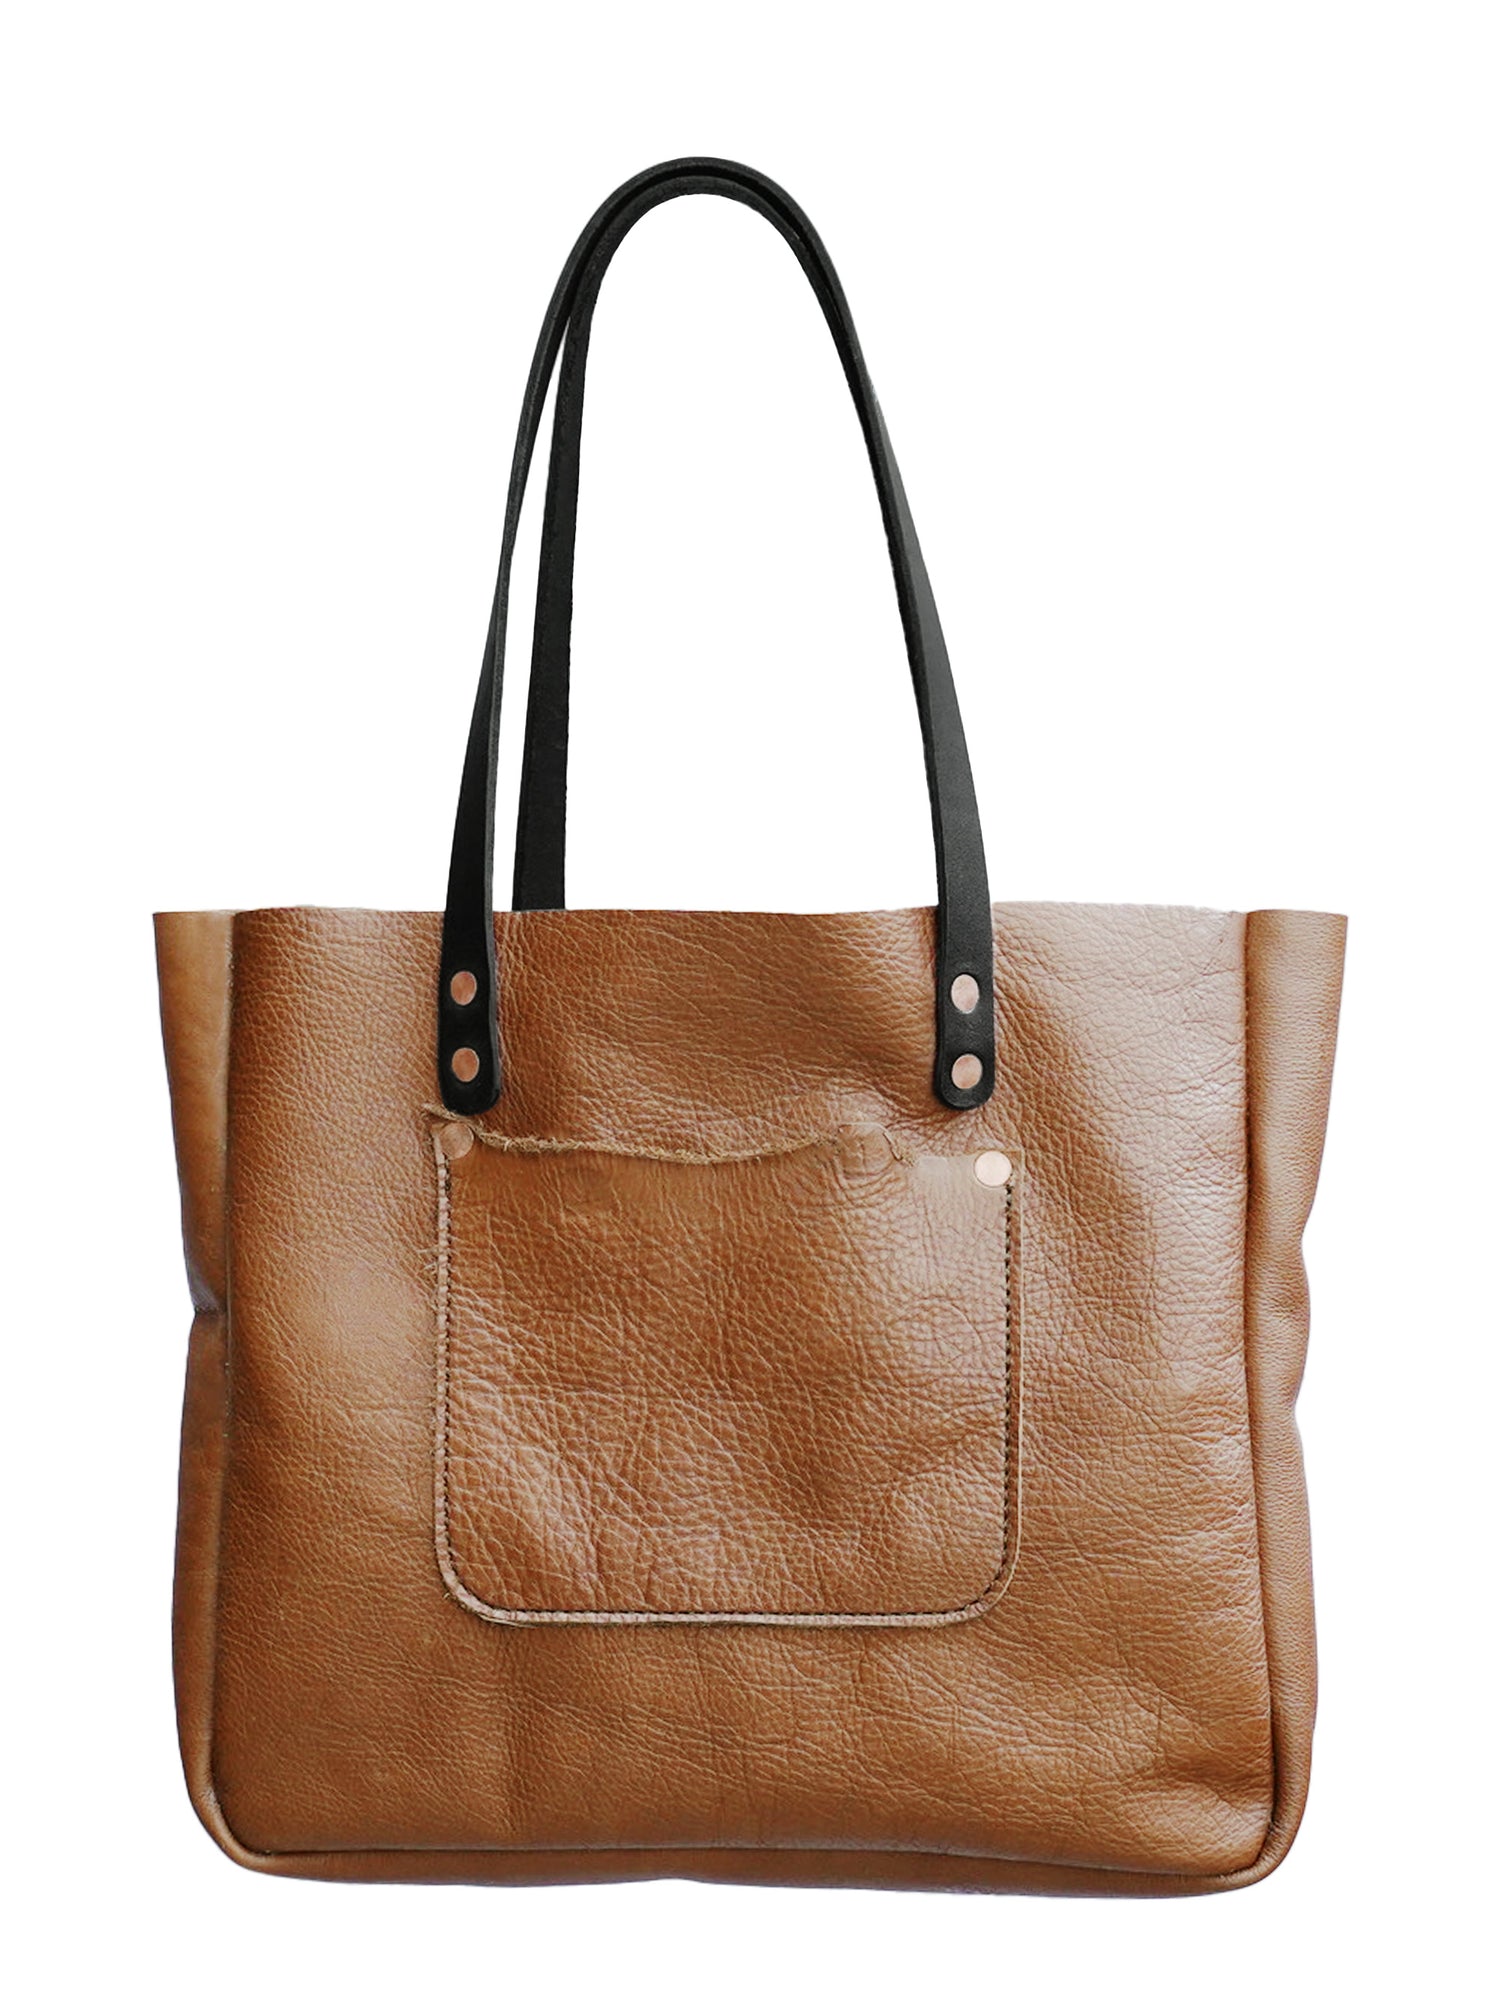 Brown Leather Tote Bag with copper rivets #3